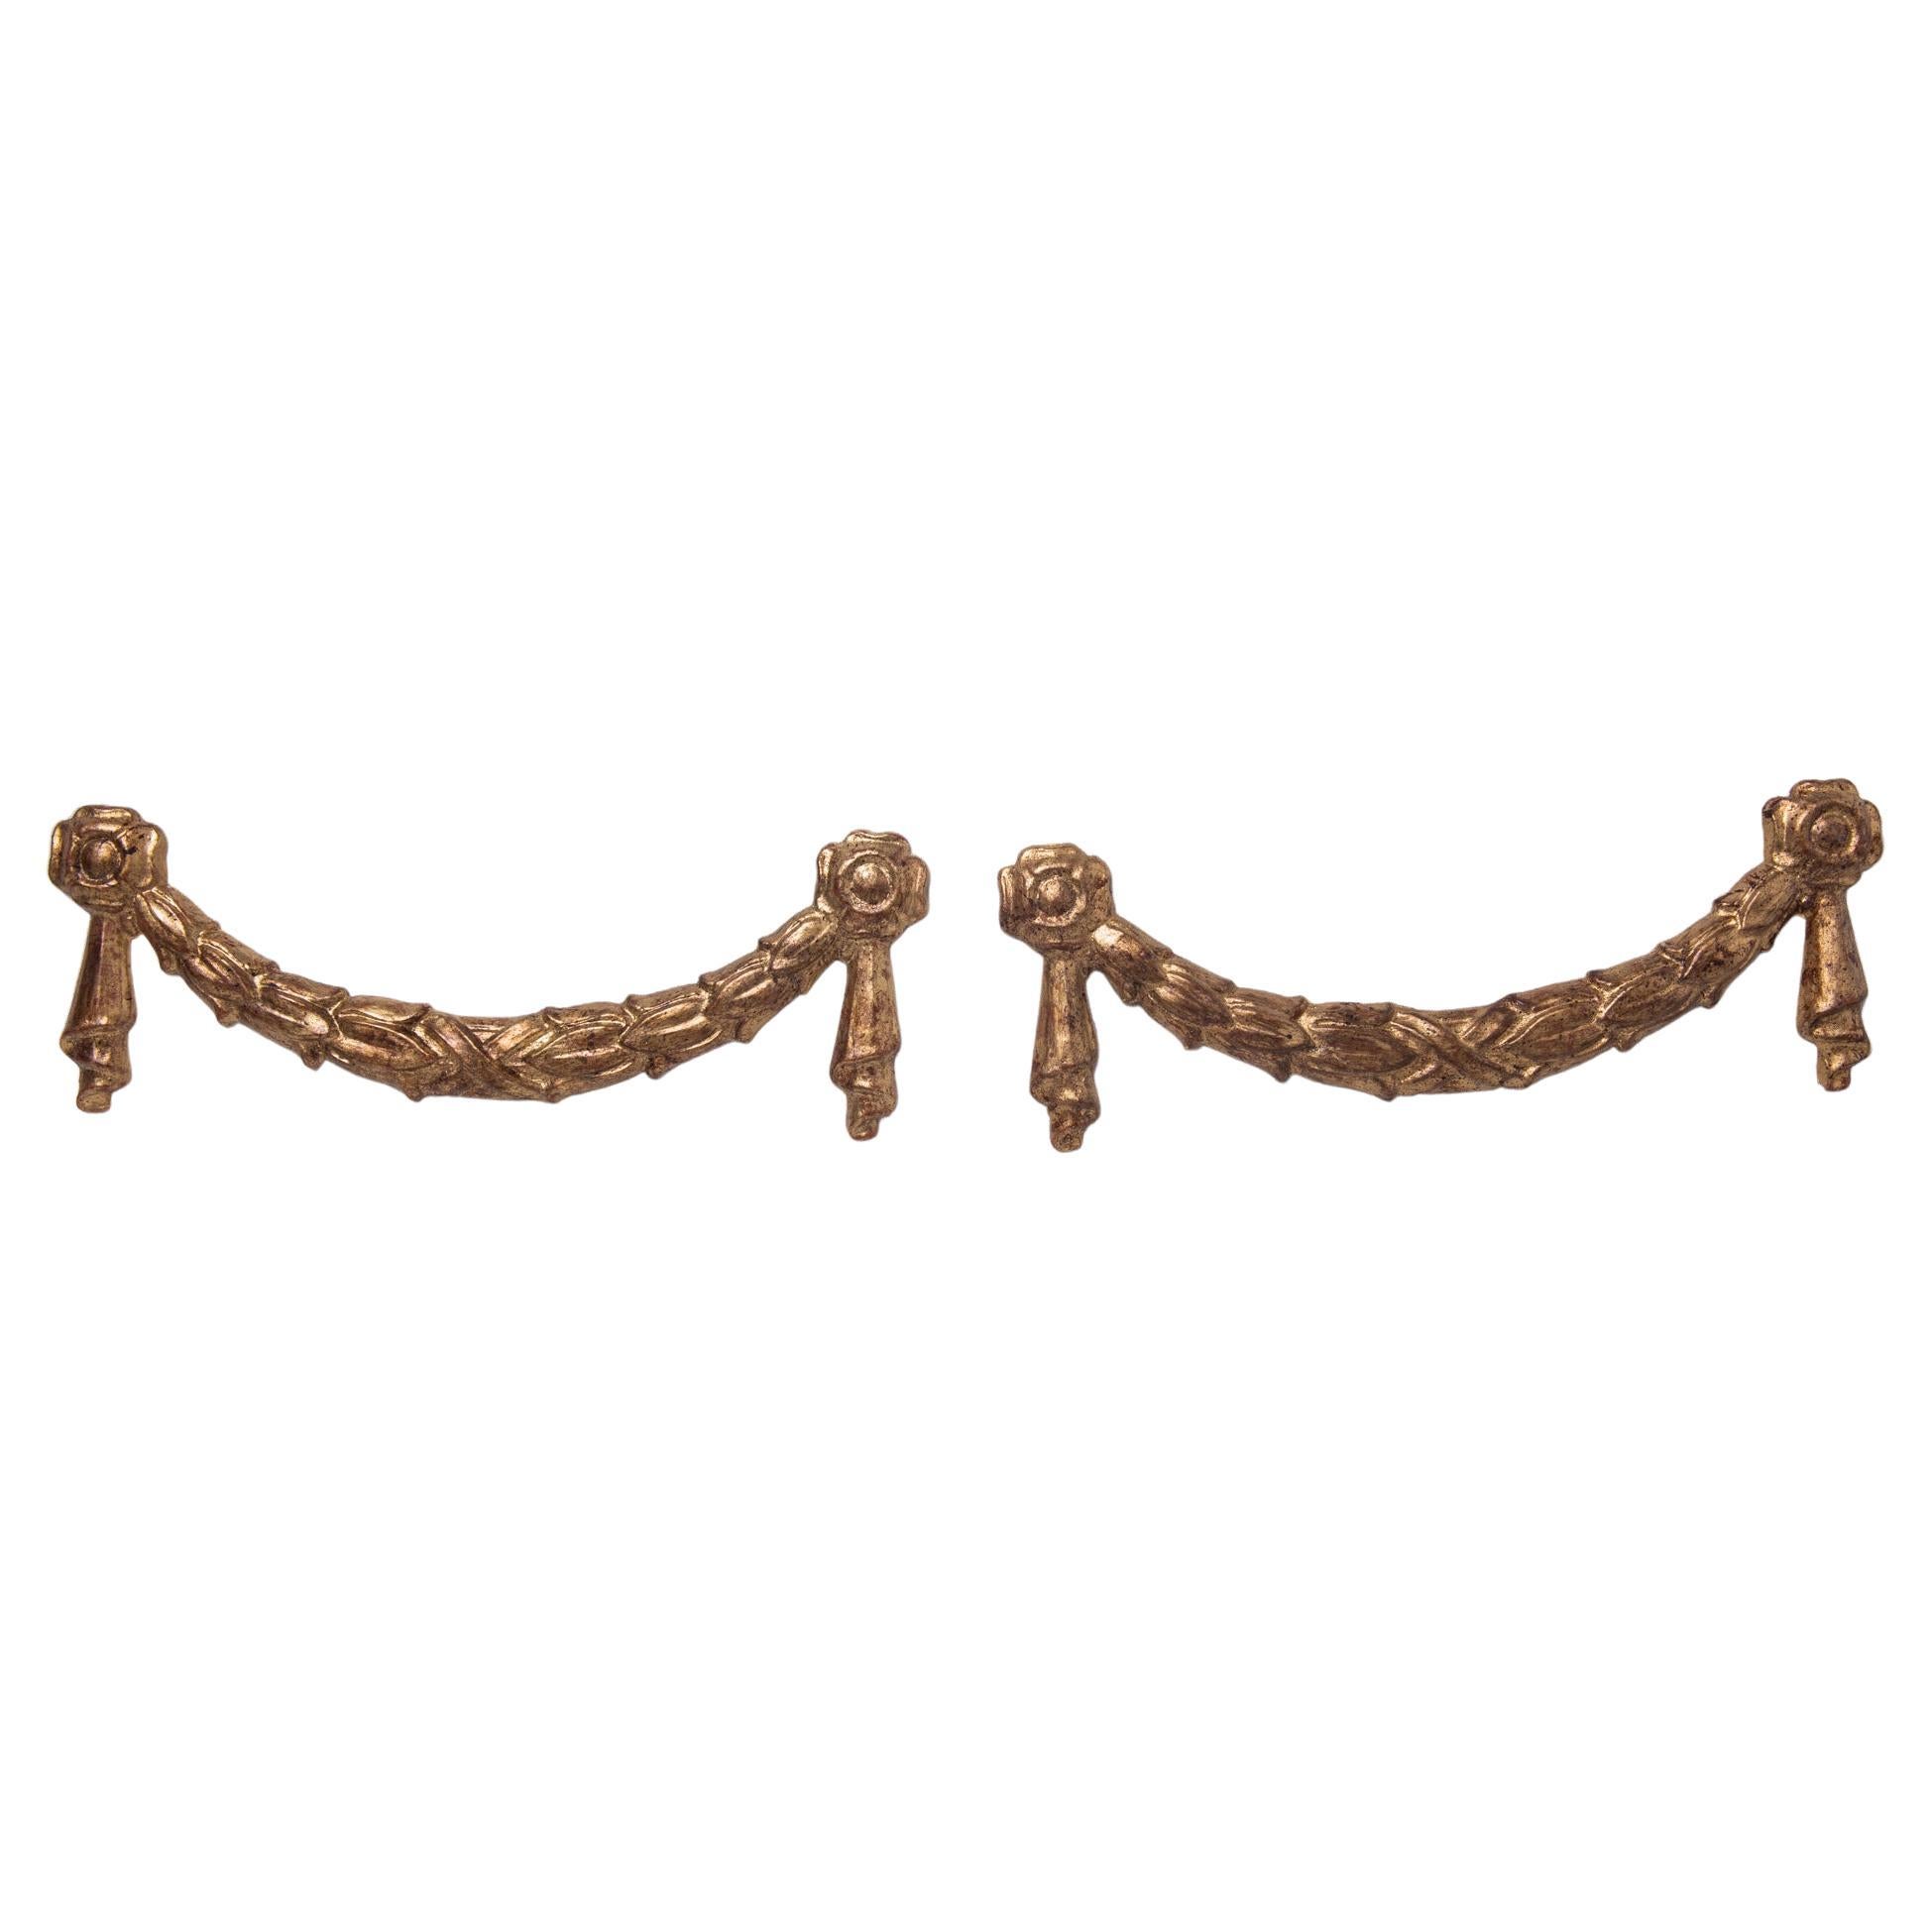 O/2799 -Pair of Italian garland friezes in gilded wood. They can be hung under two wall sconces, for decoration; also for mirror or other Your idea. They are not antique, but are so elegant!.